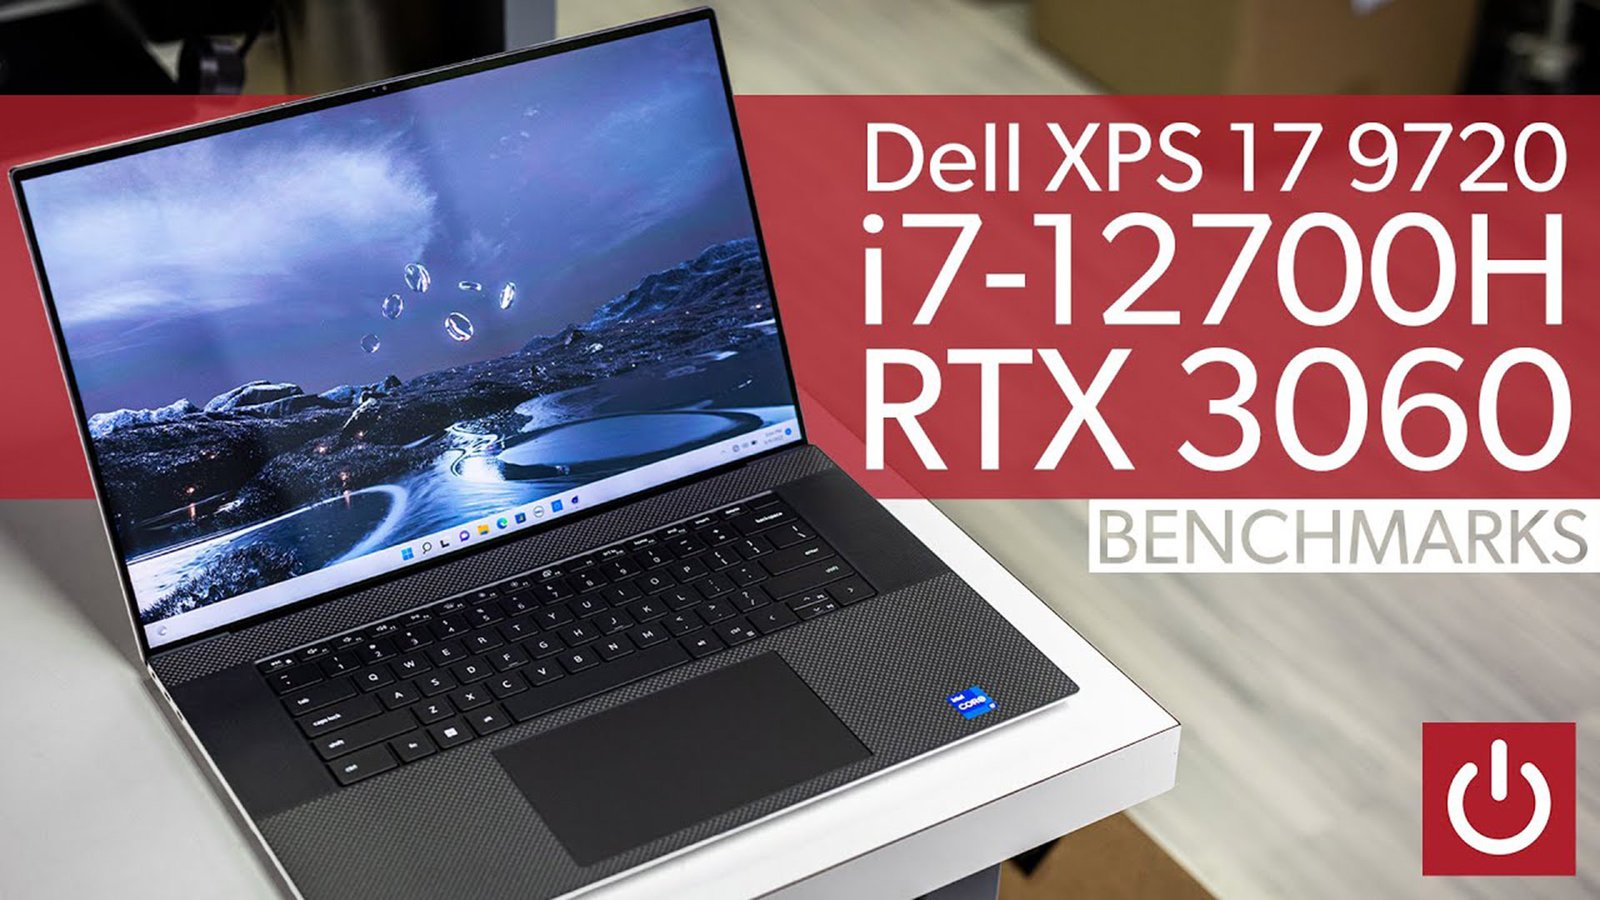 How instant is the Dell XPS 17?